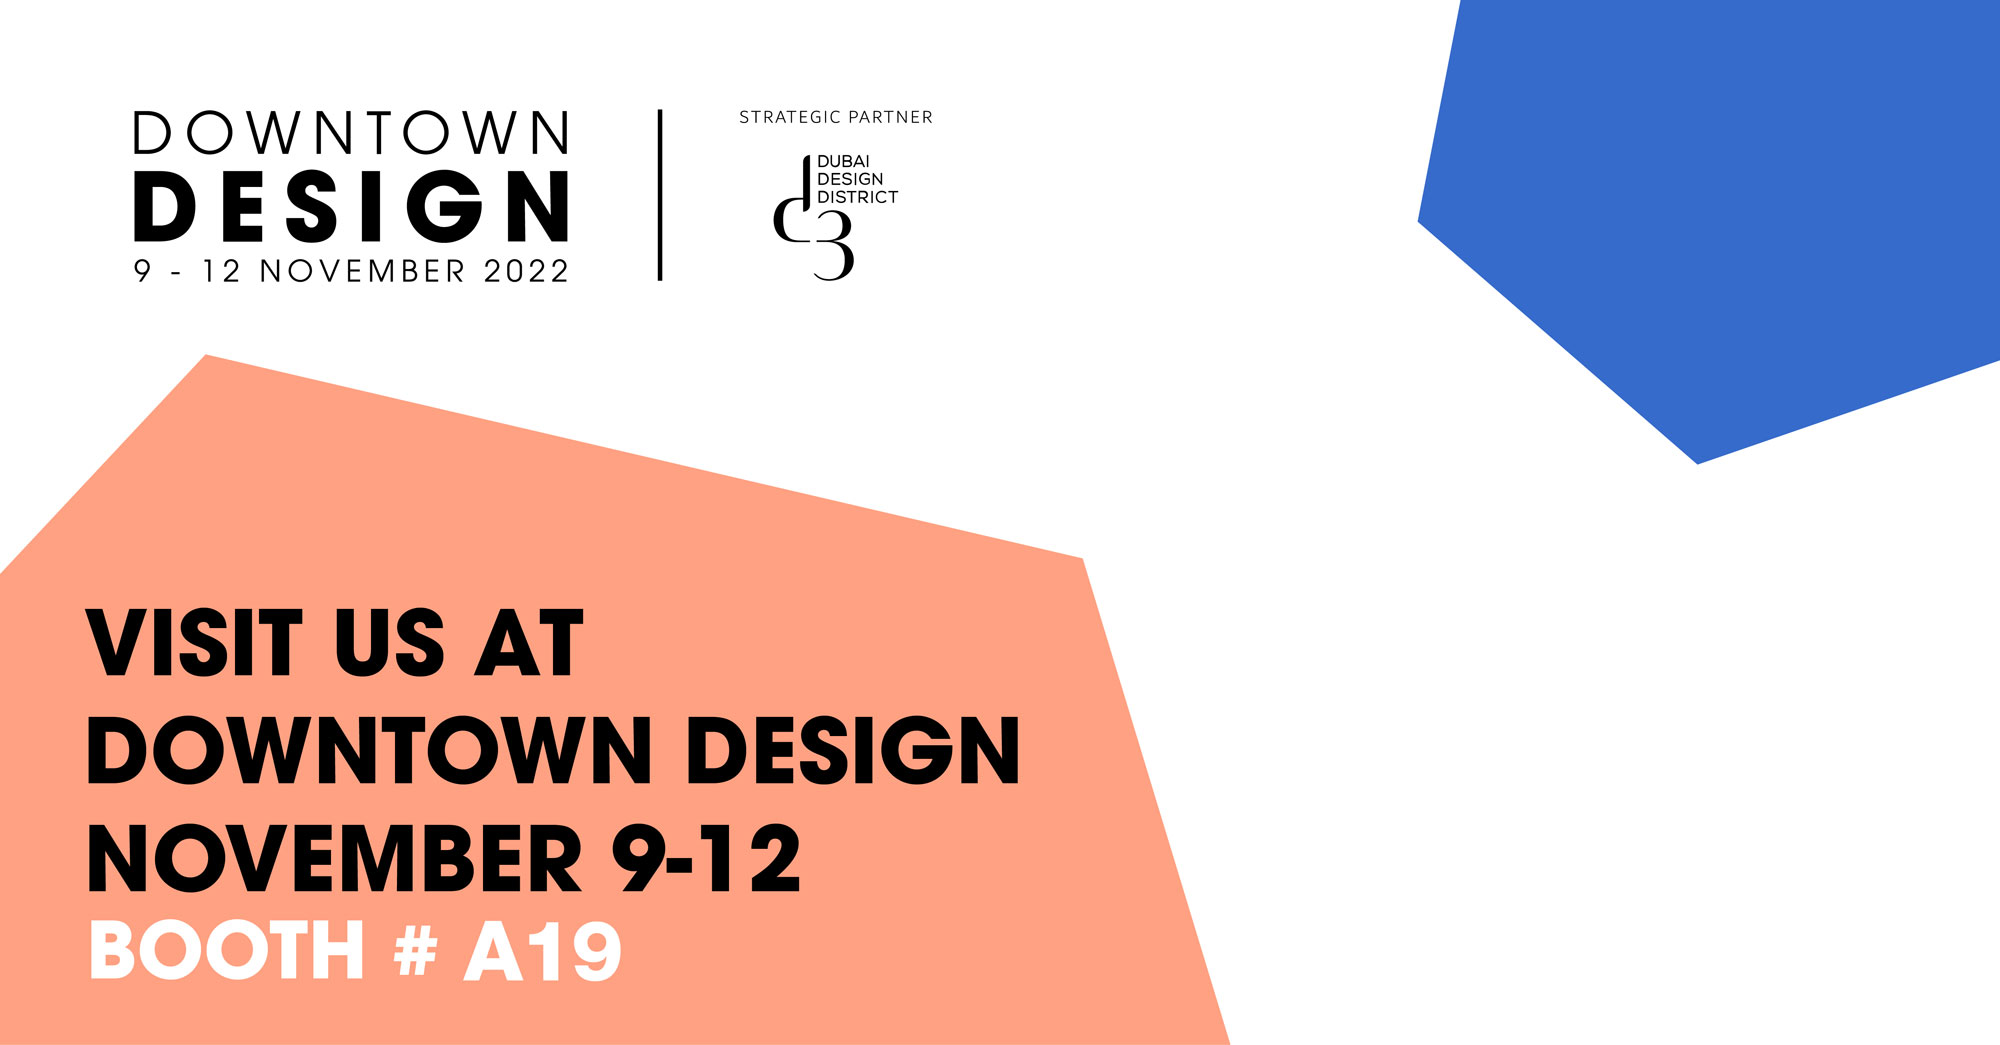 iGuzzini between history and contemporaneity at Downtown Design in Dubai